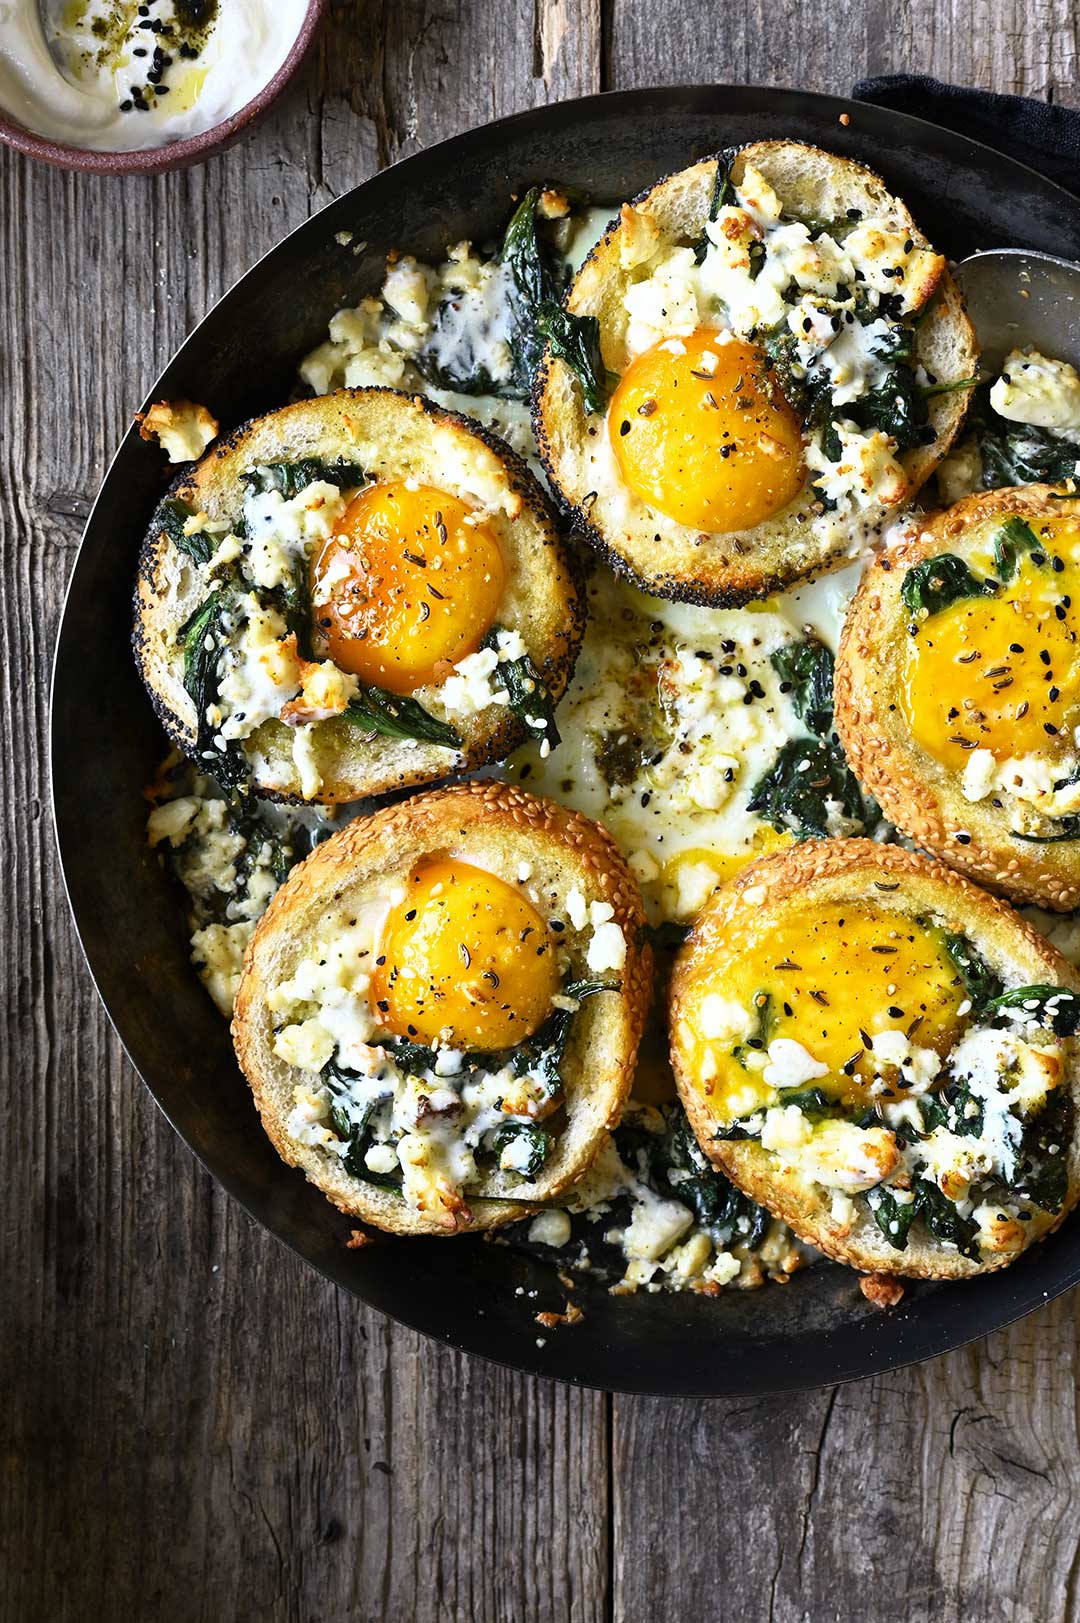 serving dumplings | Baked za'atar egg buns with spinach and feta